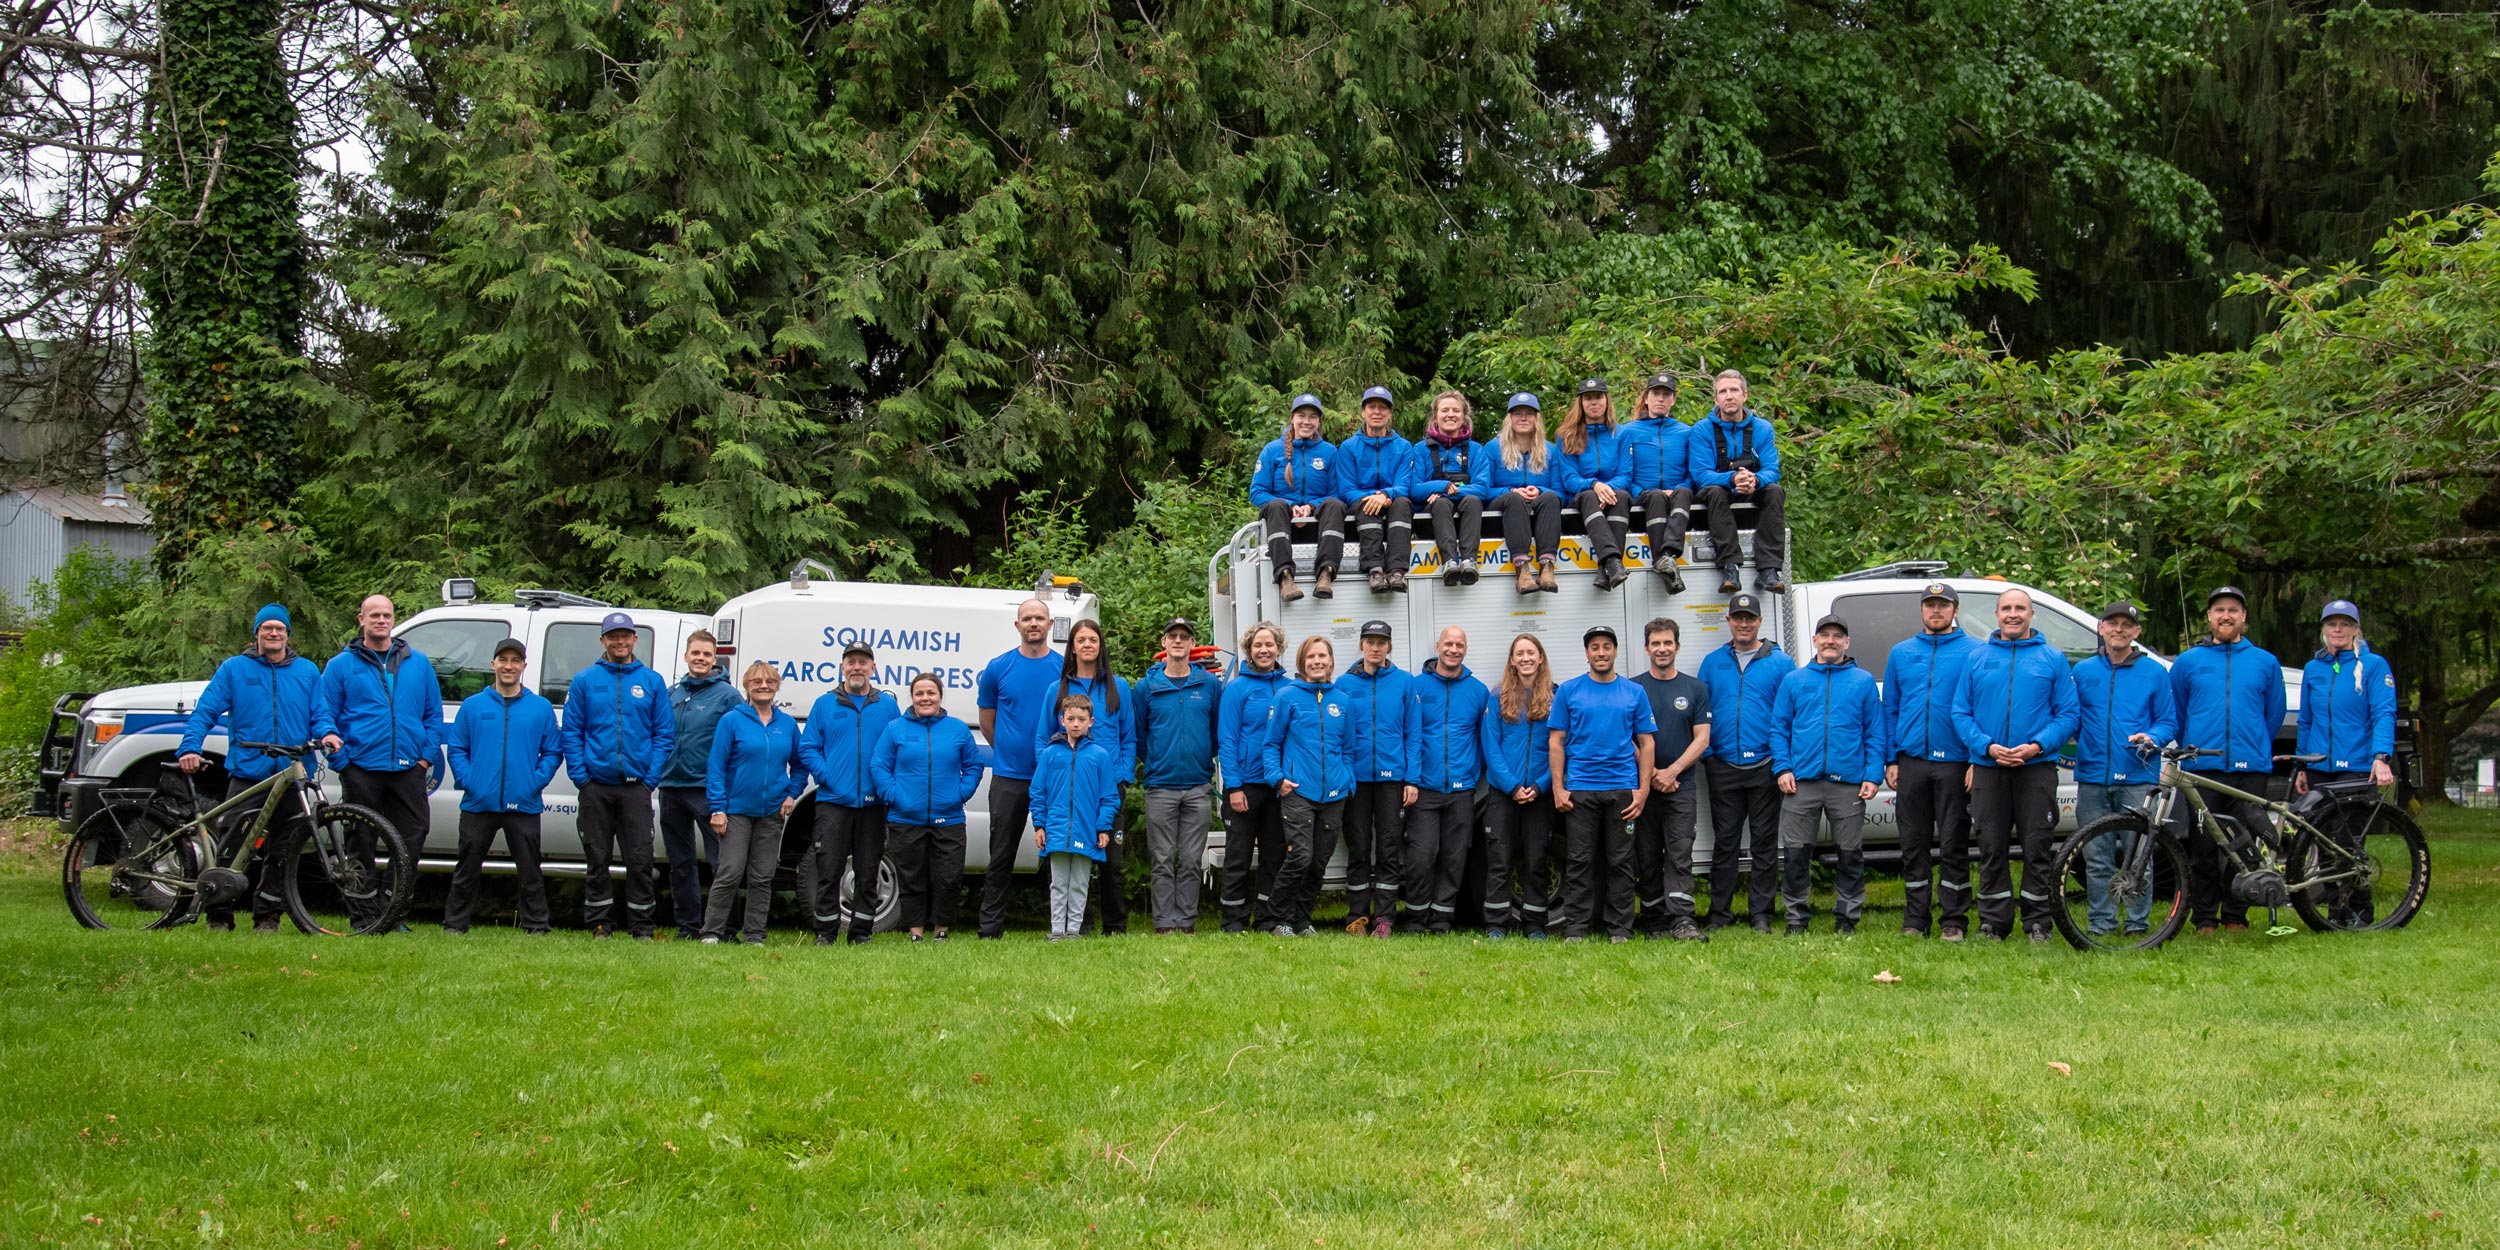 Team photo for Squamish Search and Rescue